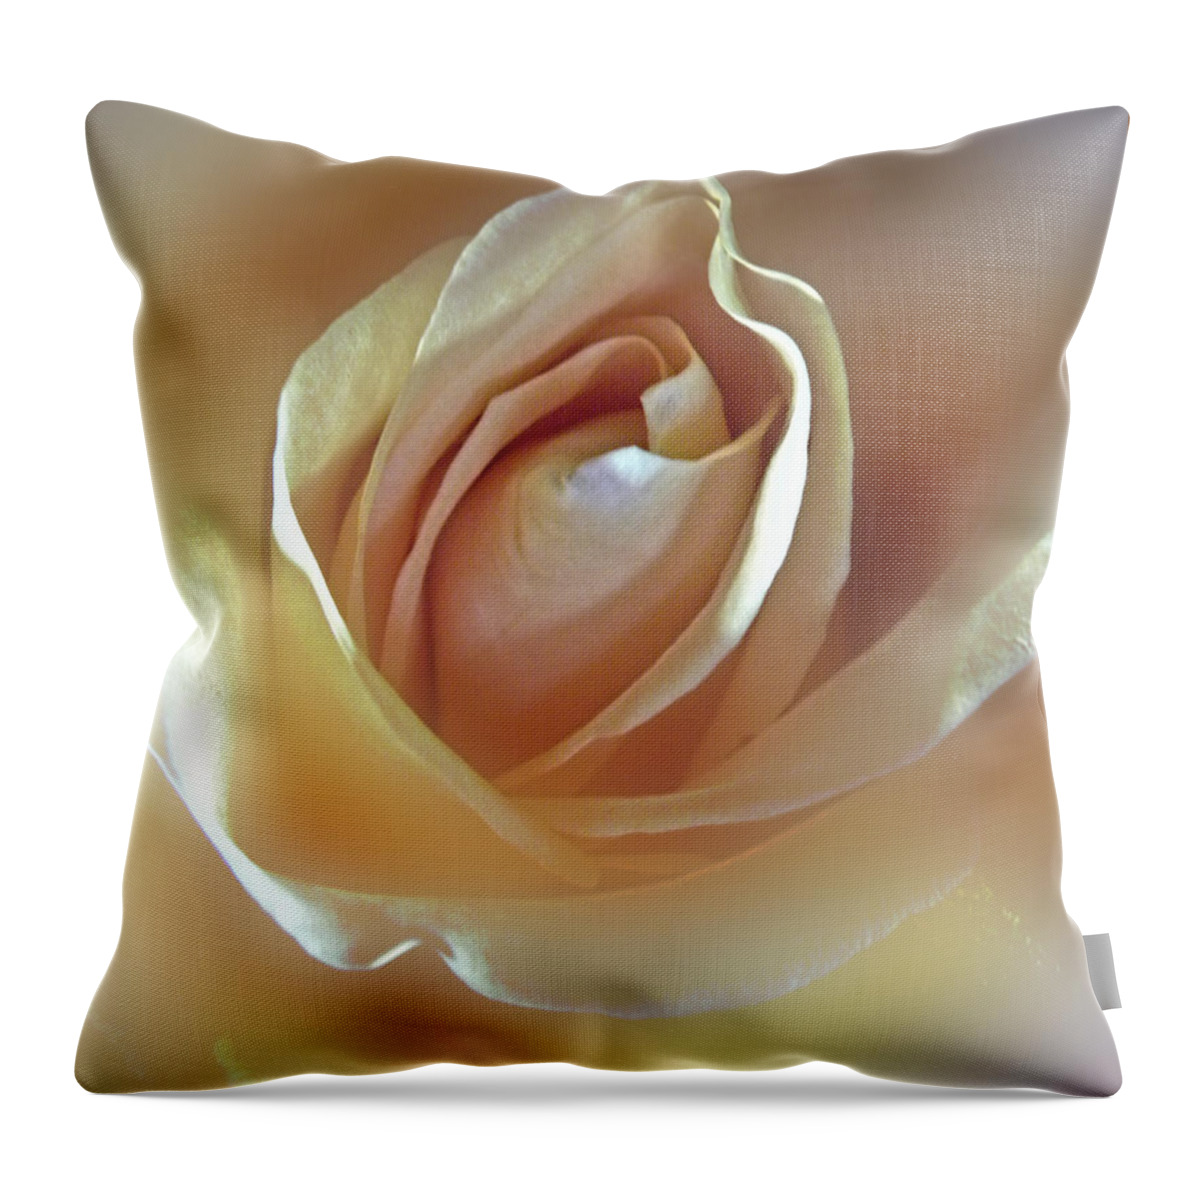 Flower Throw Pillow featuring the photograph 3977 by Peter Holme III